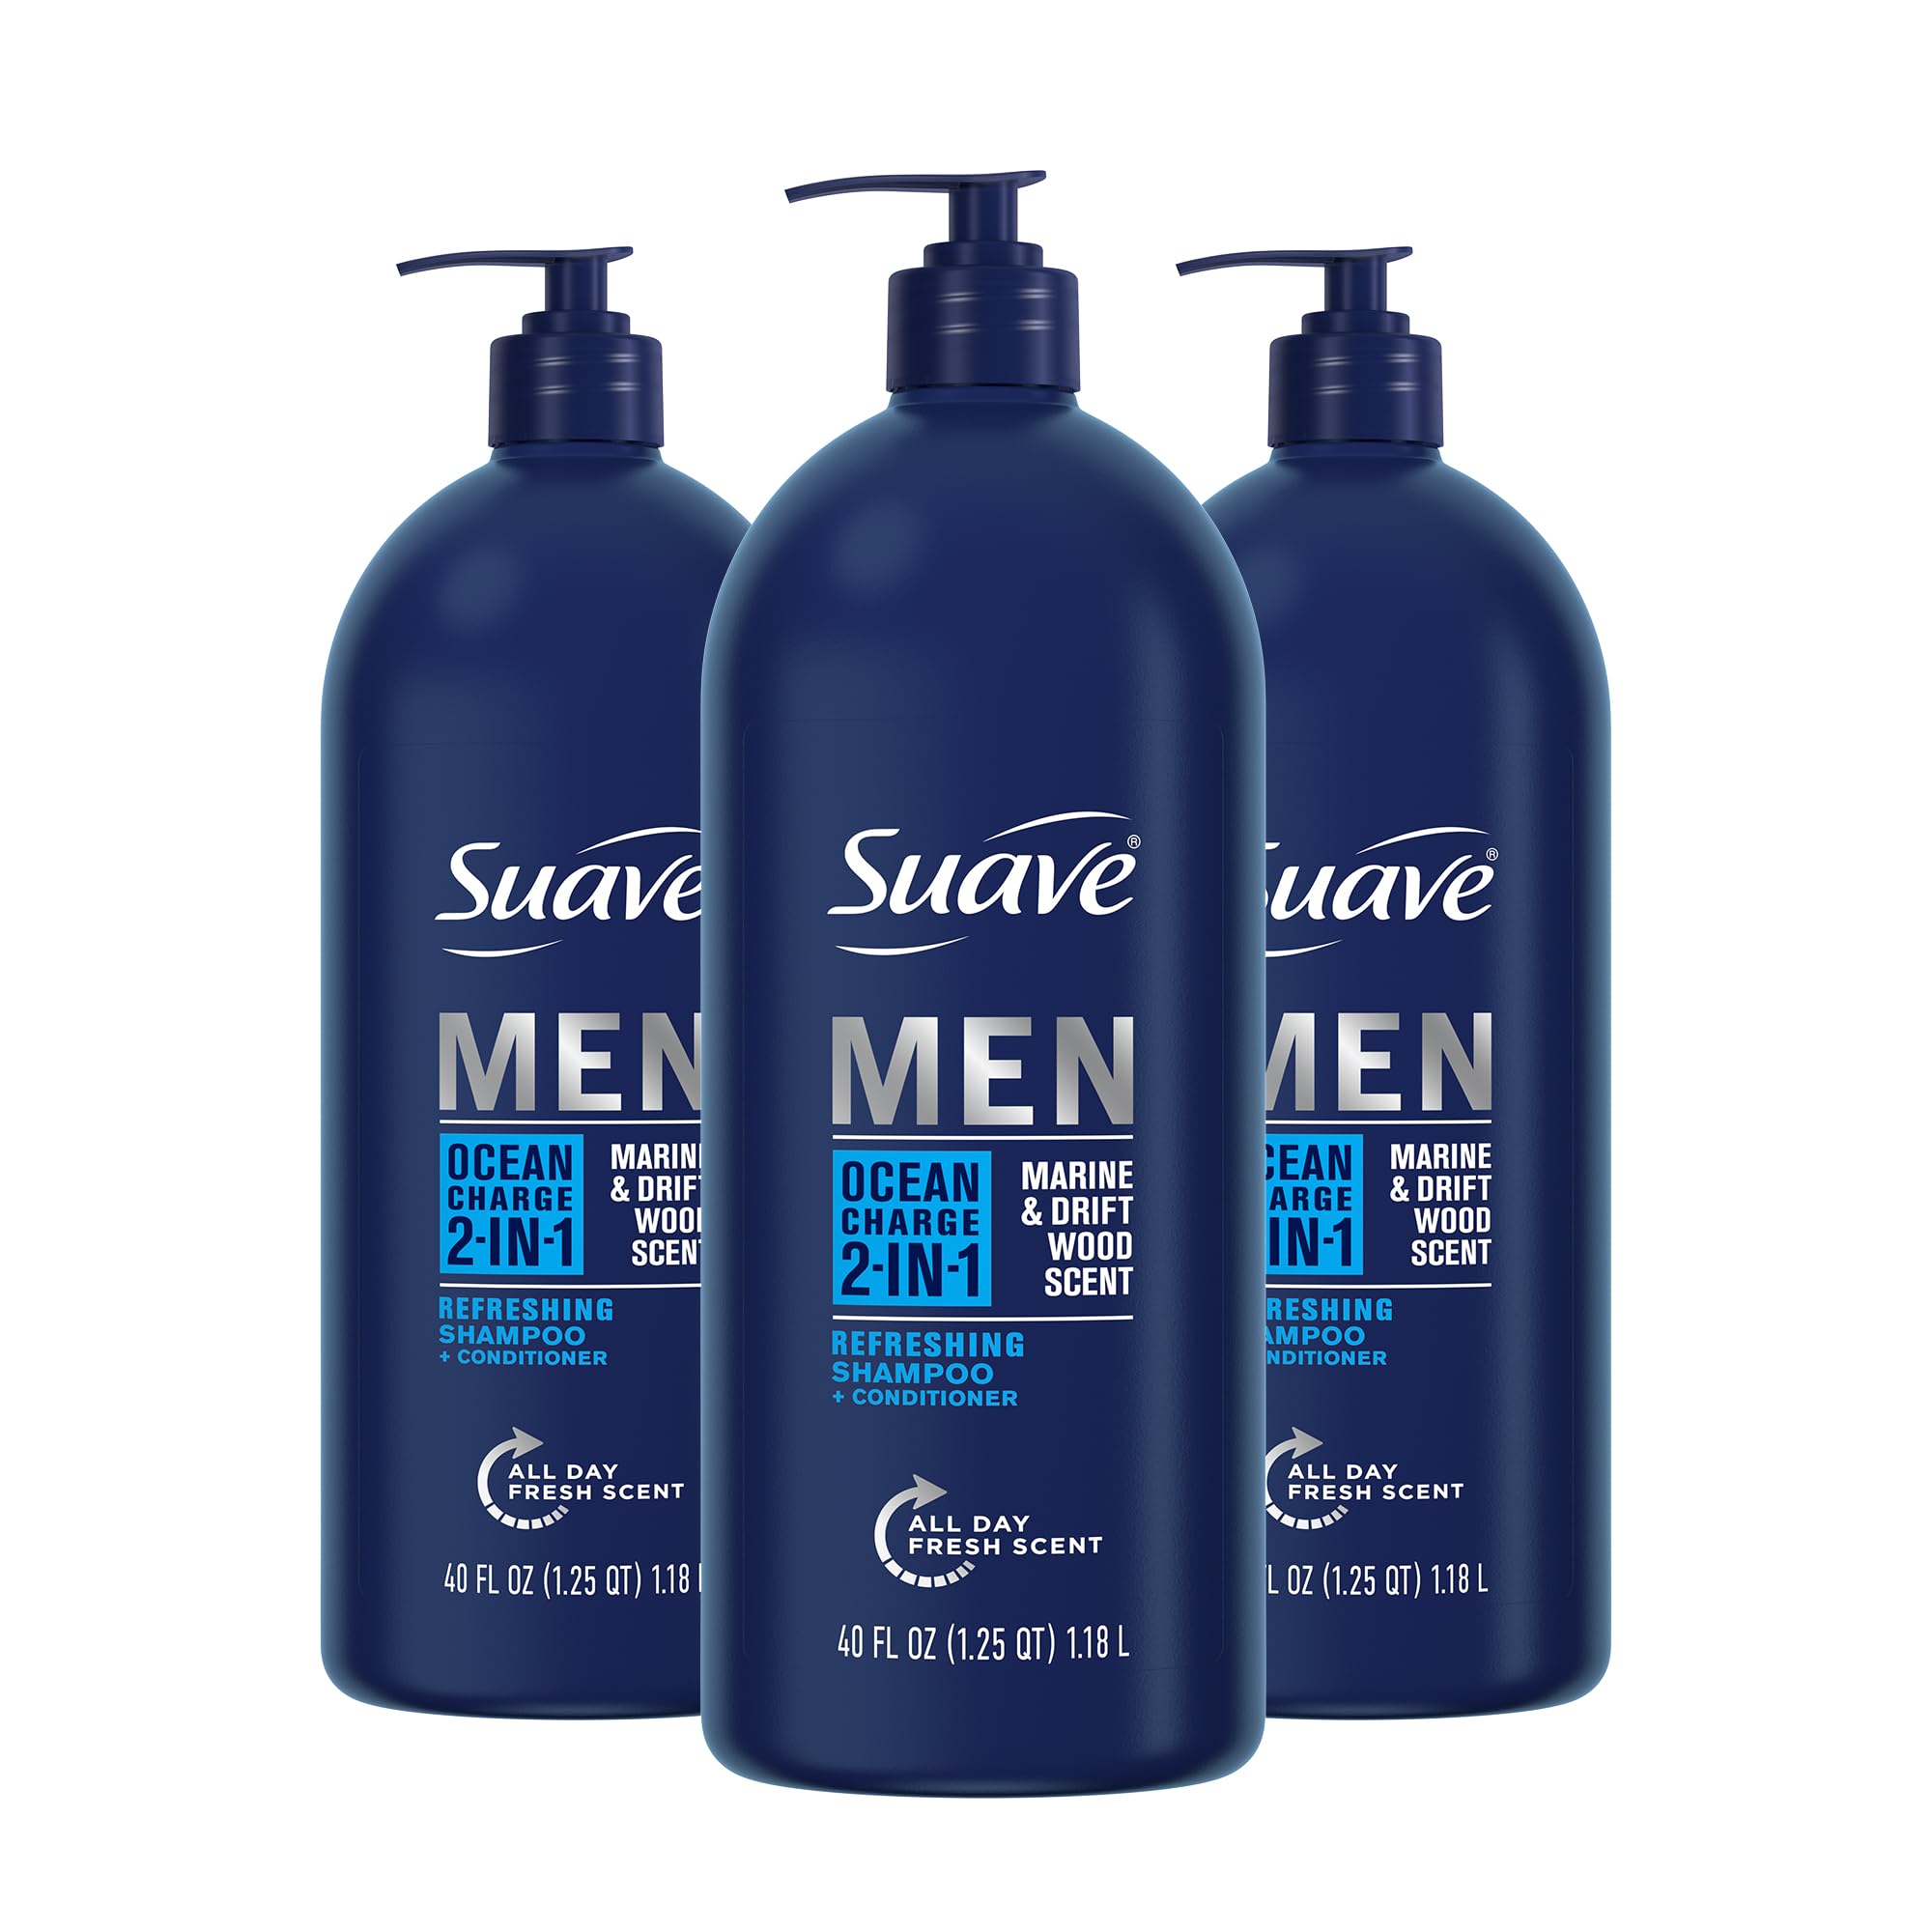 Suave Men Shampoo and Conditioner 2 in 1 Ocean Charge Refreshing, Cleanse and Conditions Hair, 40 oz Pack of 3